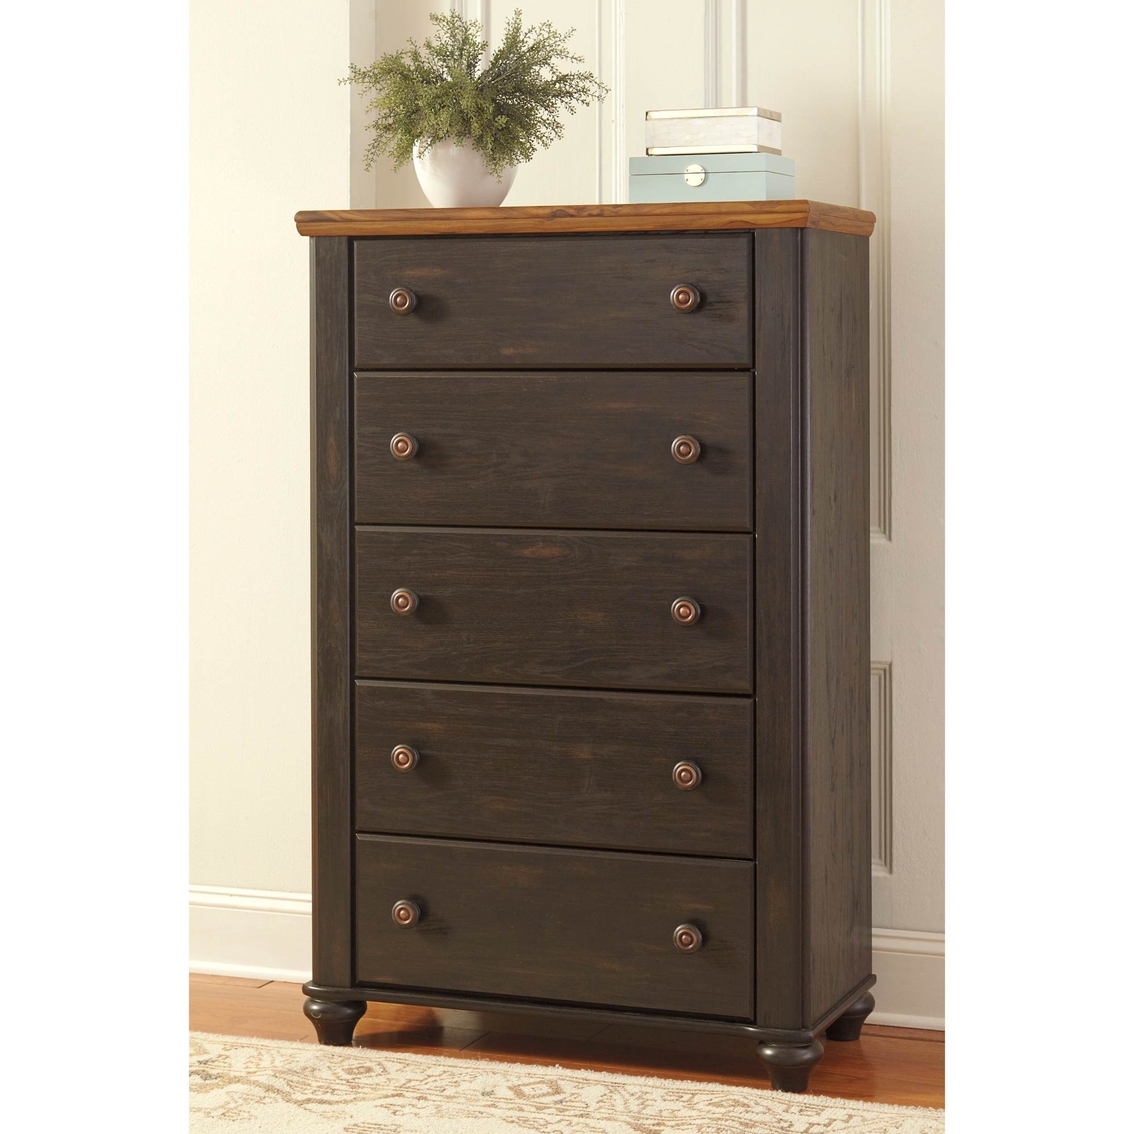 Ashley Maxington Five Drawer Chest - Image 2 of 3